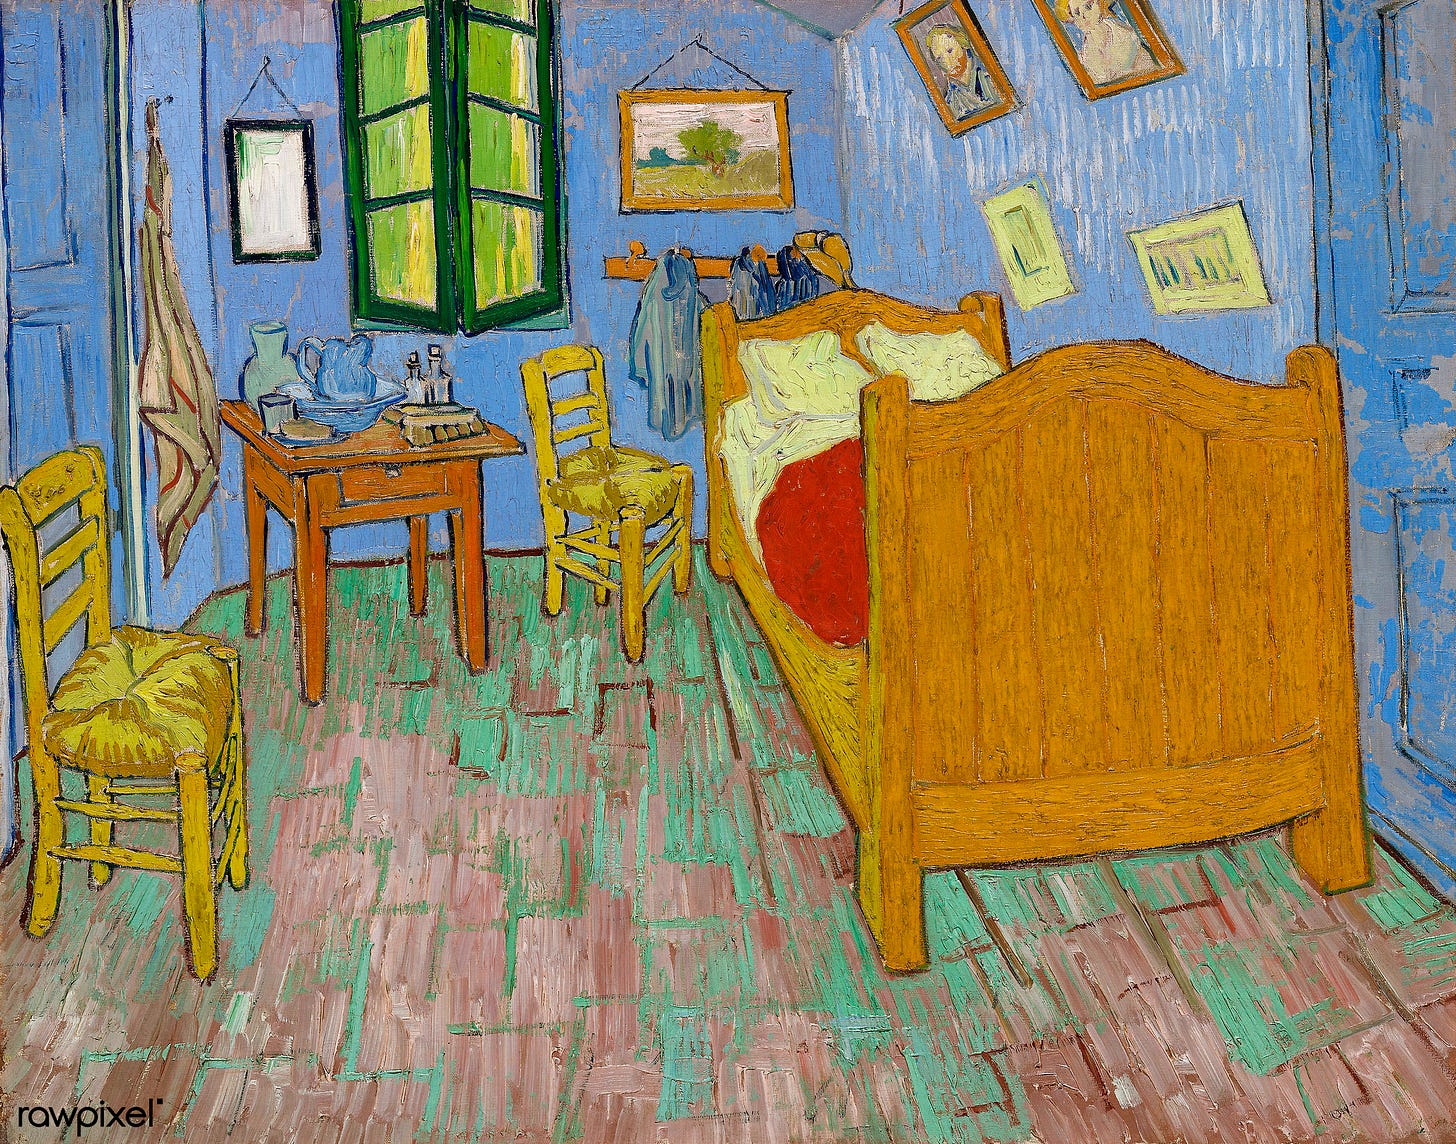 Vincent Van Gough's famous painting "The Bedroom," a small room with walls painted in blue and scuffed green paint on the flooboards. A single bed is up against the right wall, where a couple of Van Gough's paintings hang. Behind the headboard hangs another of his paintings and some hooks where his clothes and hat hang. Next to the bed is an empty chair, a small table with a washing basin and jug, a carafe, a glass, and a plate with a piece of bread. Behind the table is a French window, slightly open, and a small mirror hanging on the wall.